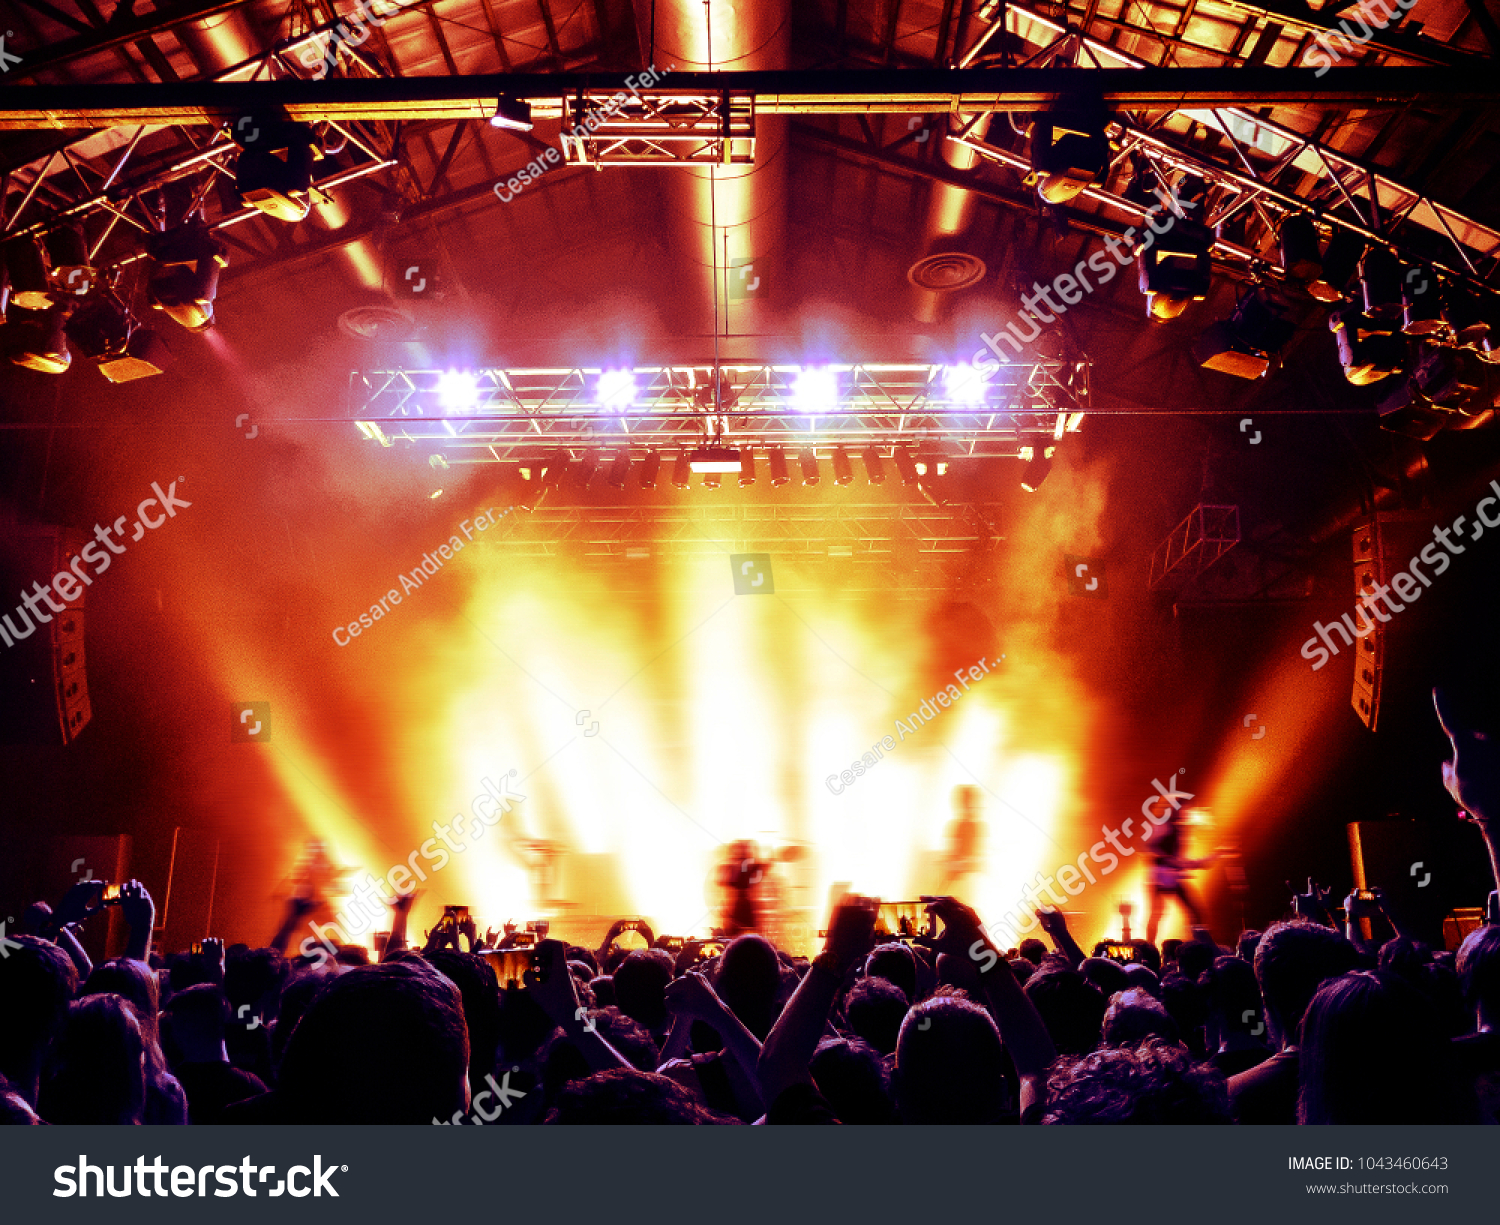 Concert hall with a lit stage and people silhouettes during a concert #1043460643